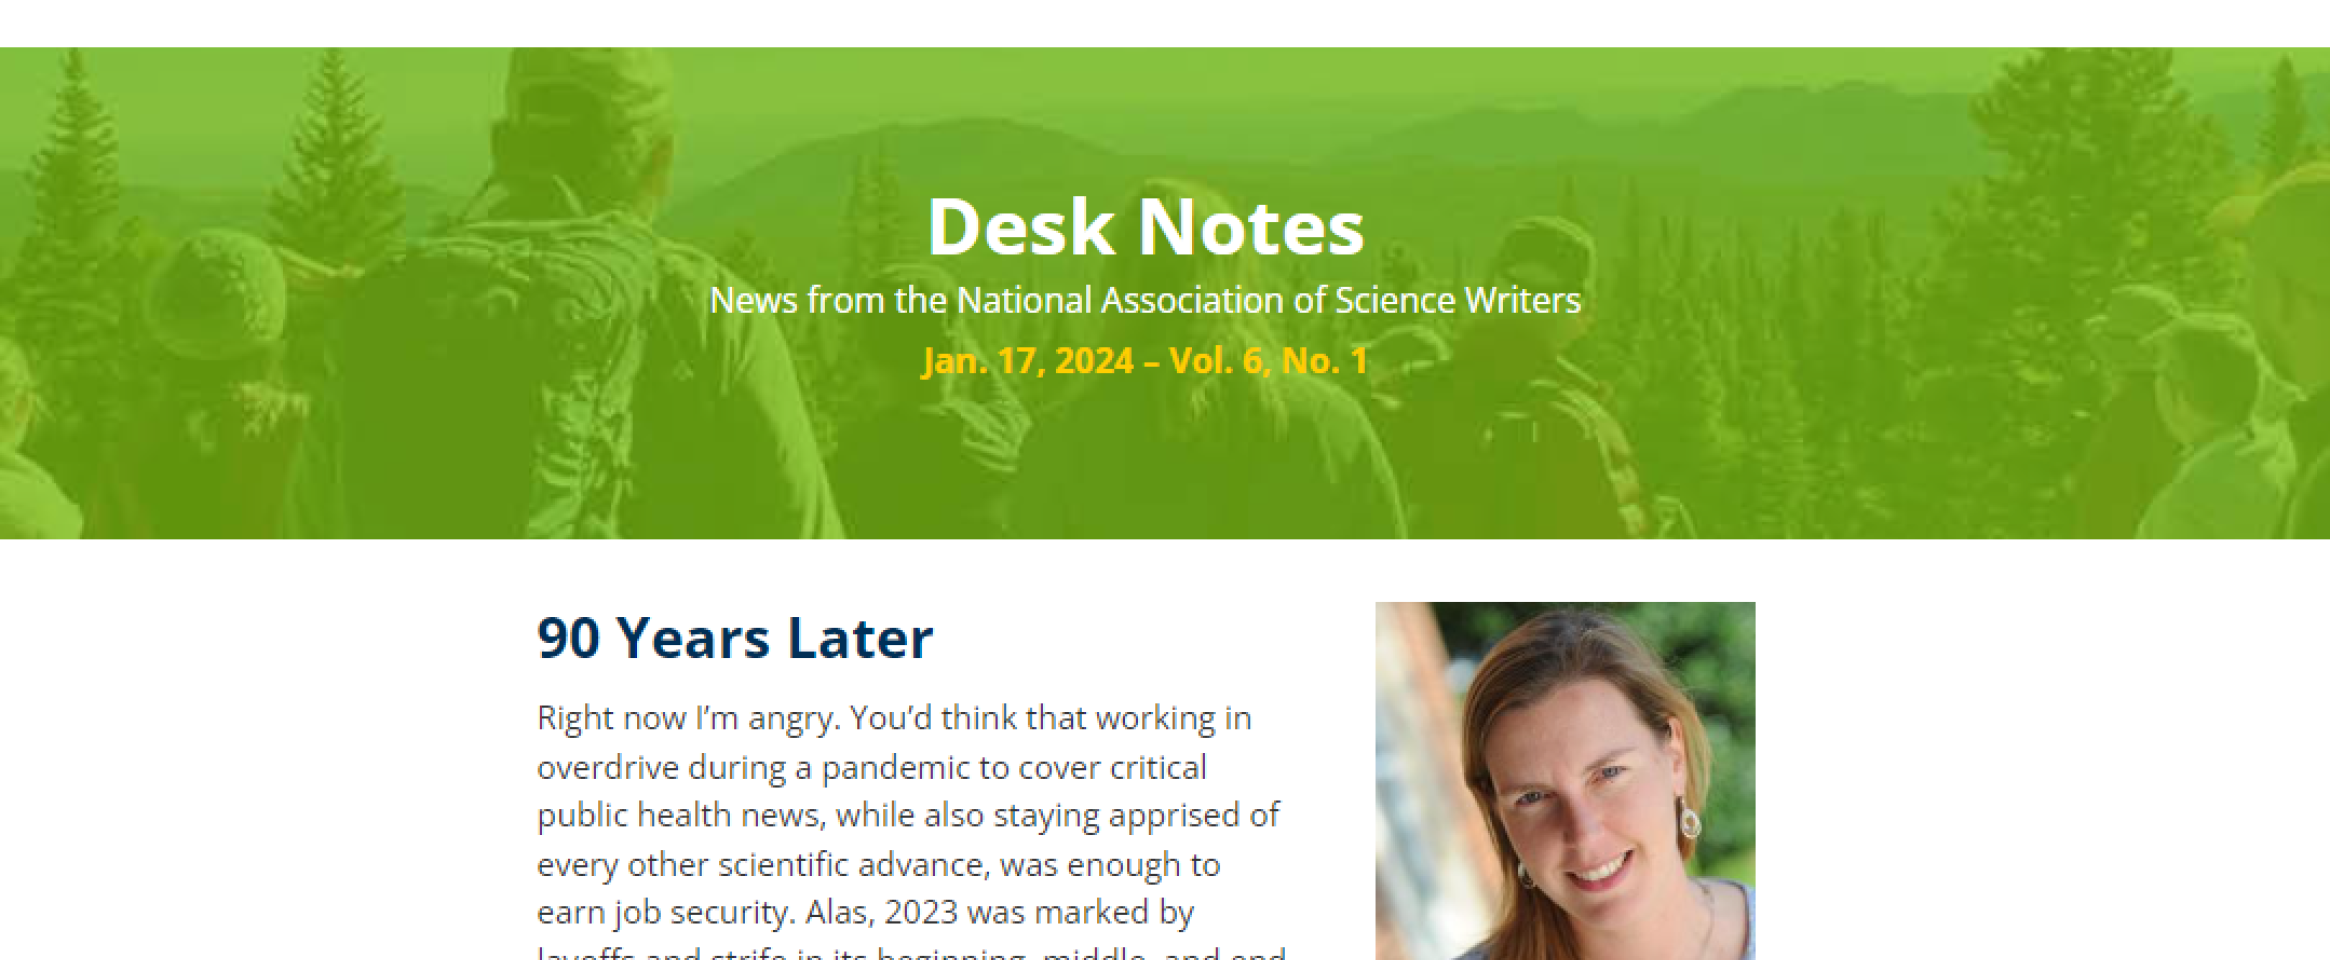 Screenshot of mailchimp version of NASW email newsletter with text Desk Notes as title, and headline 90 years later with photo of Tinsley Davis.